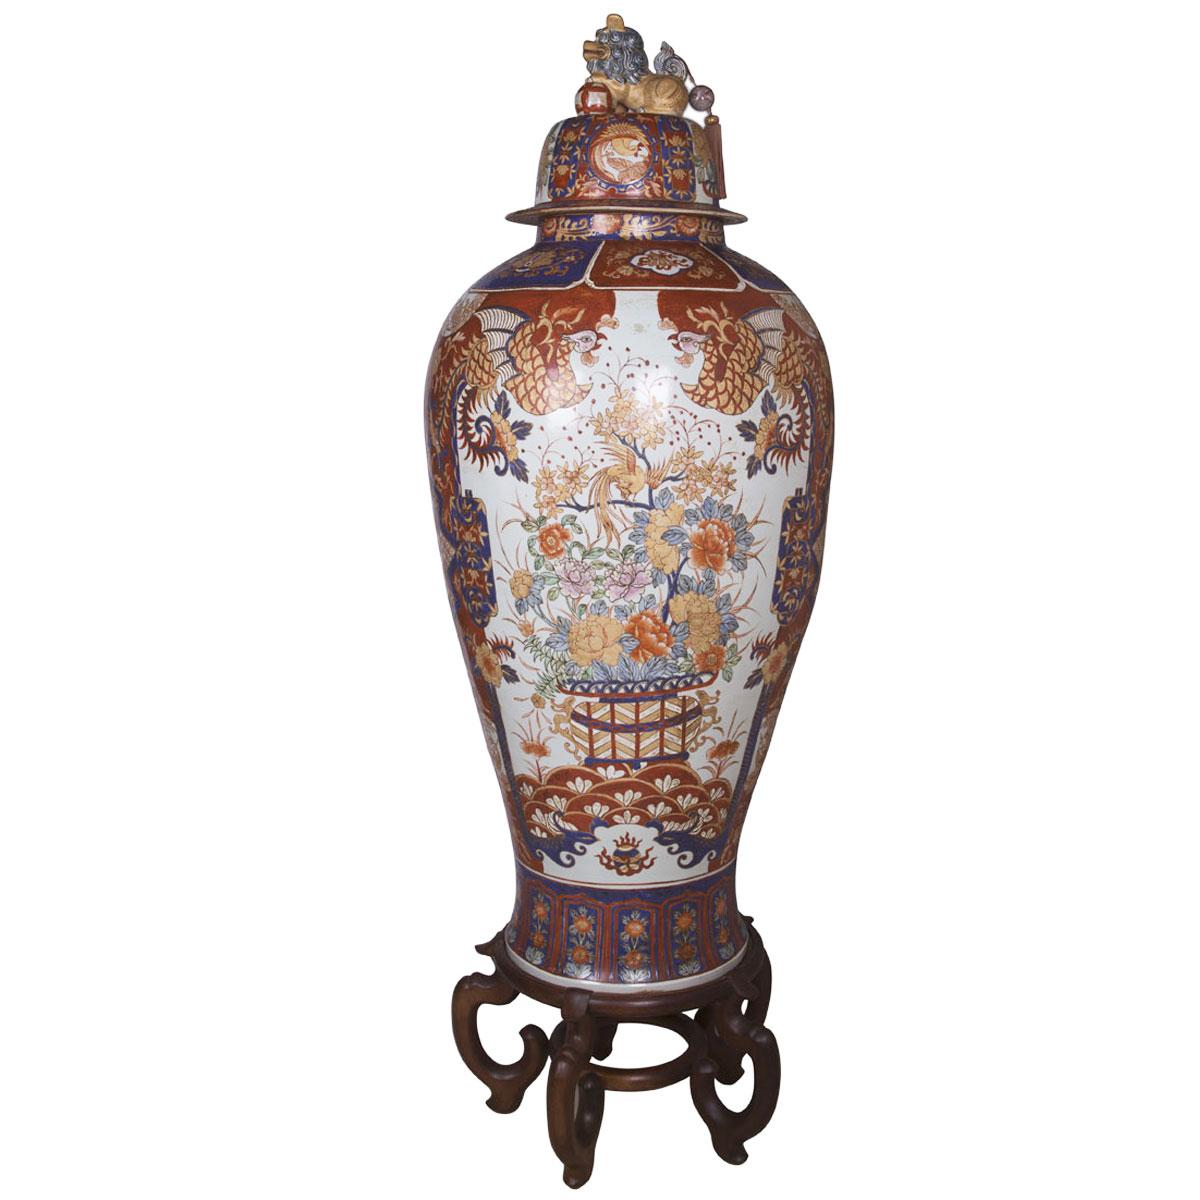 This hand painted tall Imari style vase is made of porcelain. The removable porcelian lid at the top features Fu Dog which is a strong feng shui protection symbol. Wooden stand is includes for this item. This vase measures 66 inches in height and